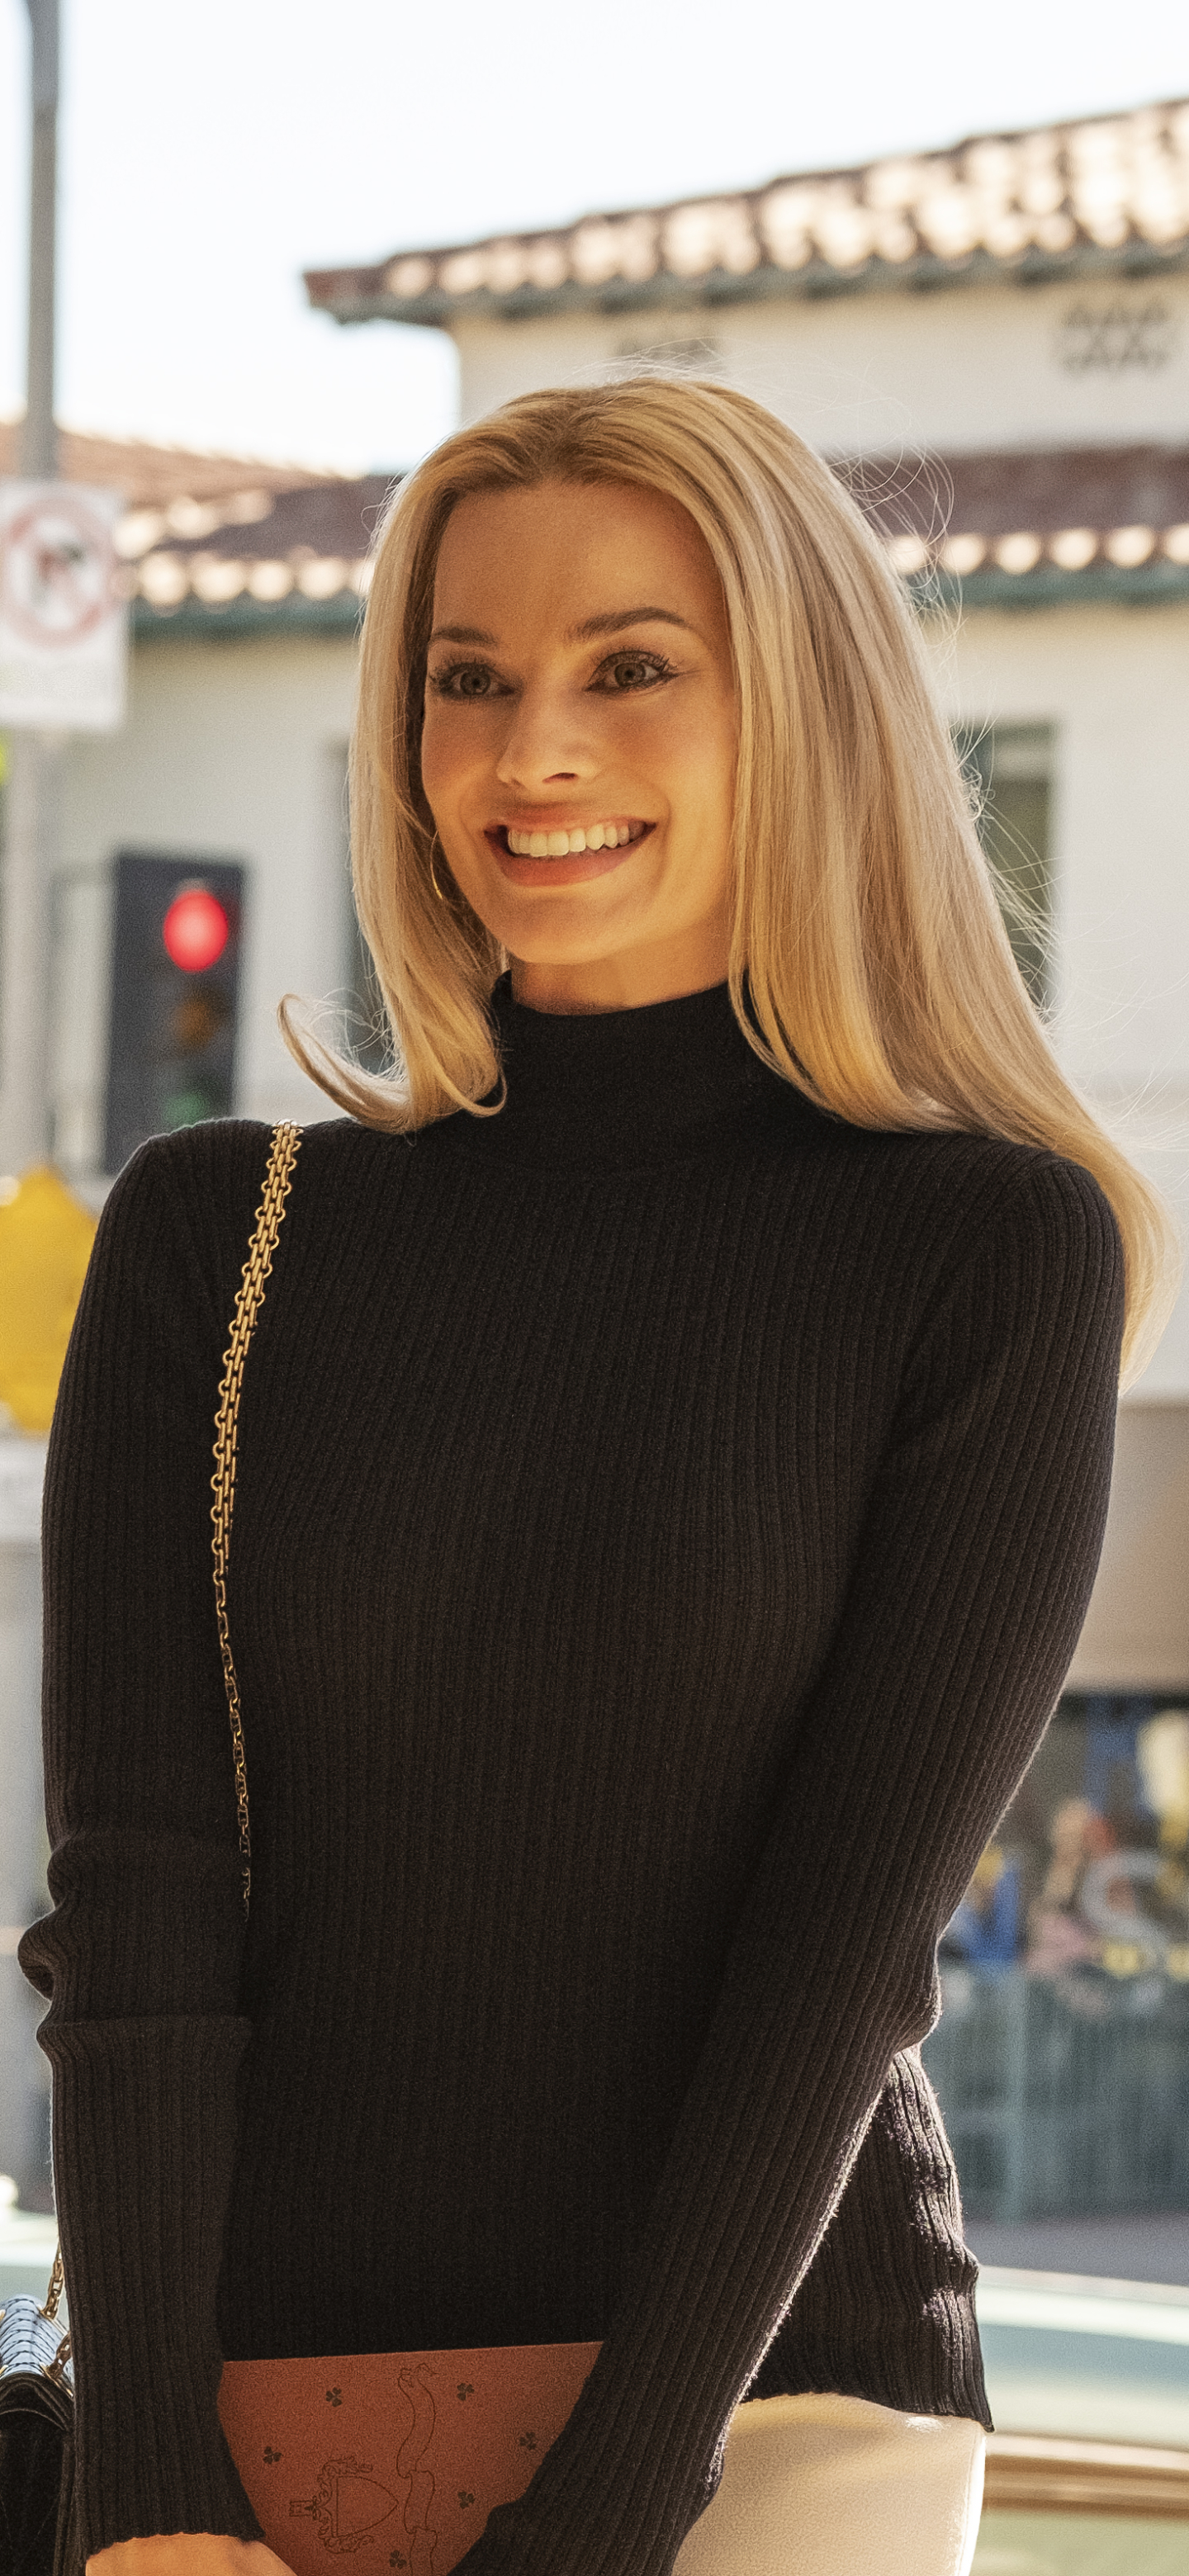 movie, once upon a time in hollywood, smile, actress, margot robbie, blonde, australian Full HD